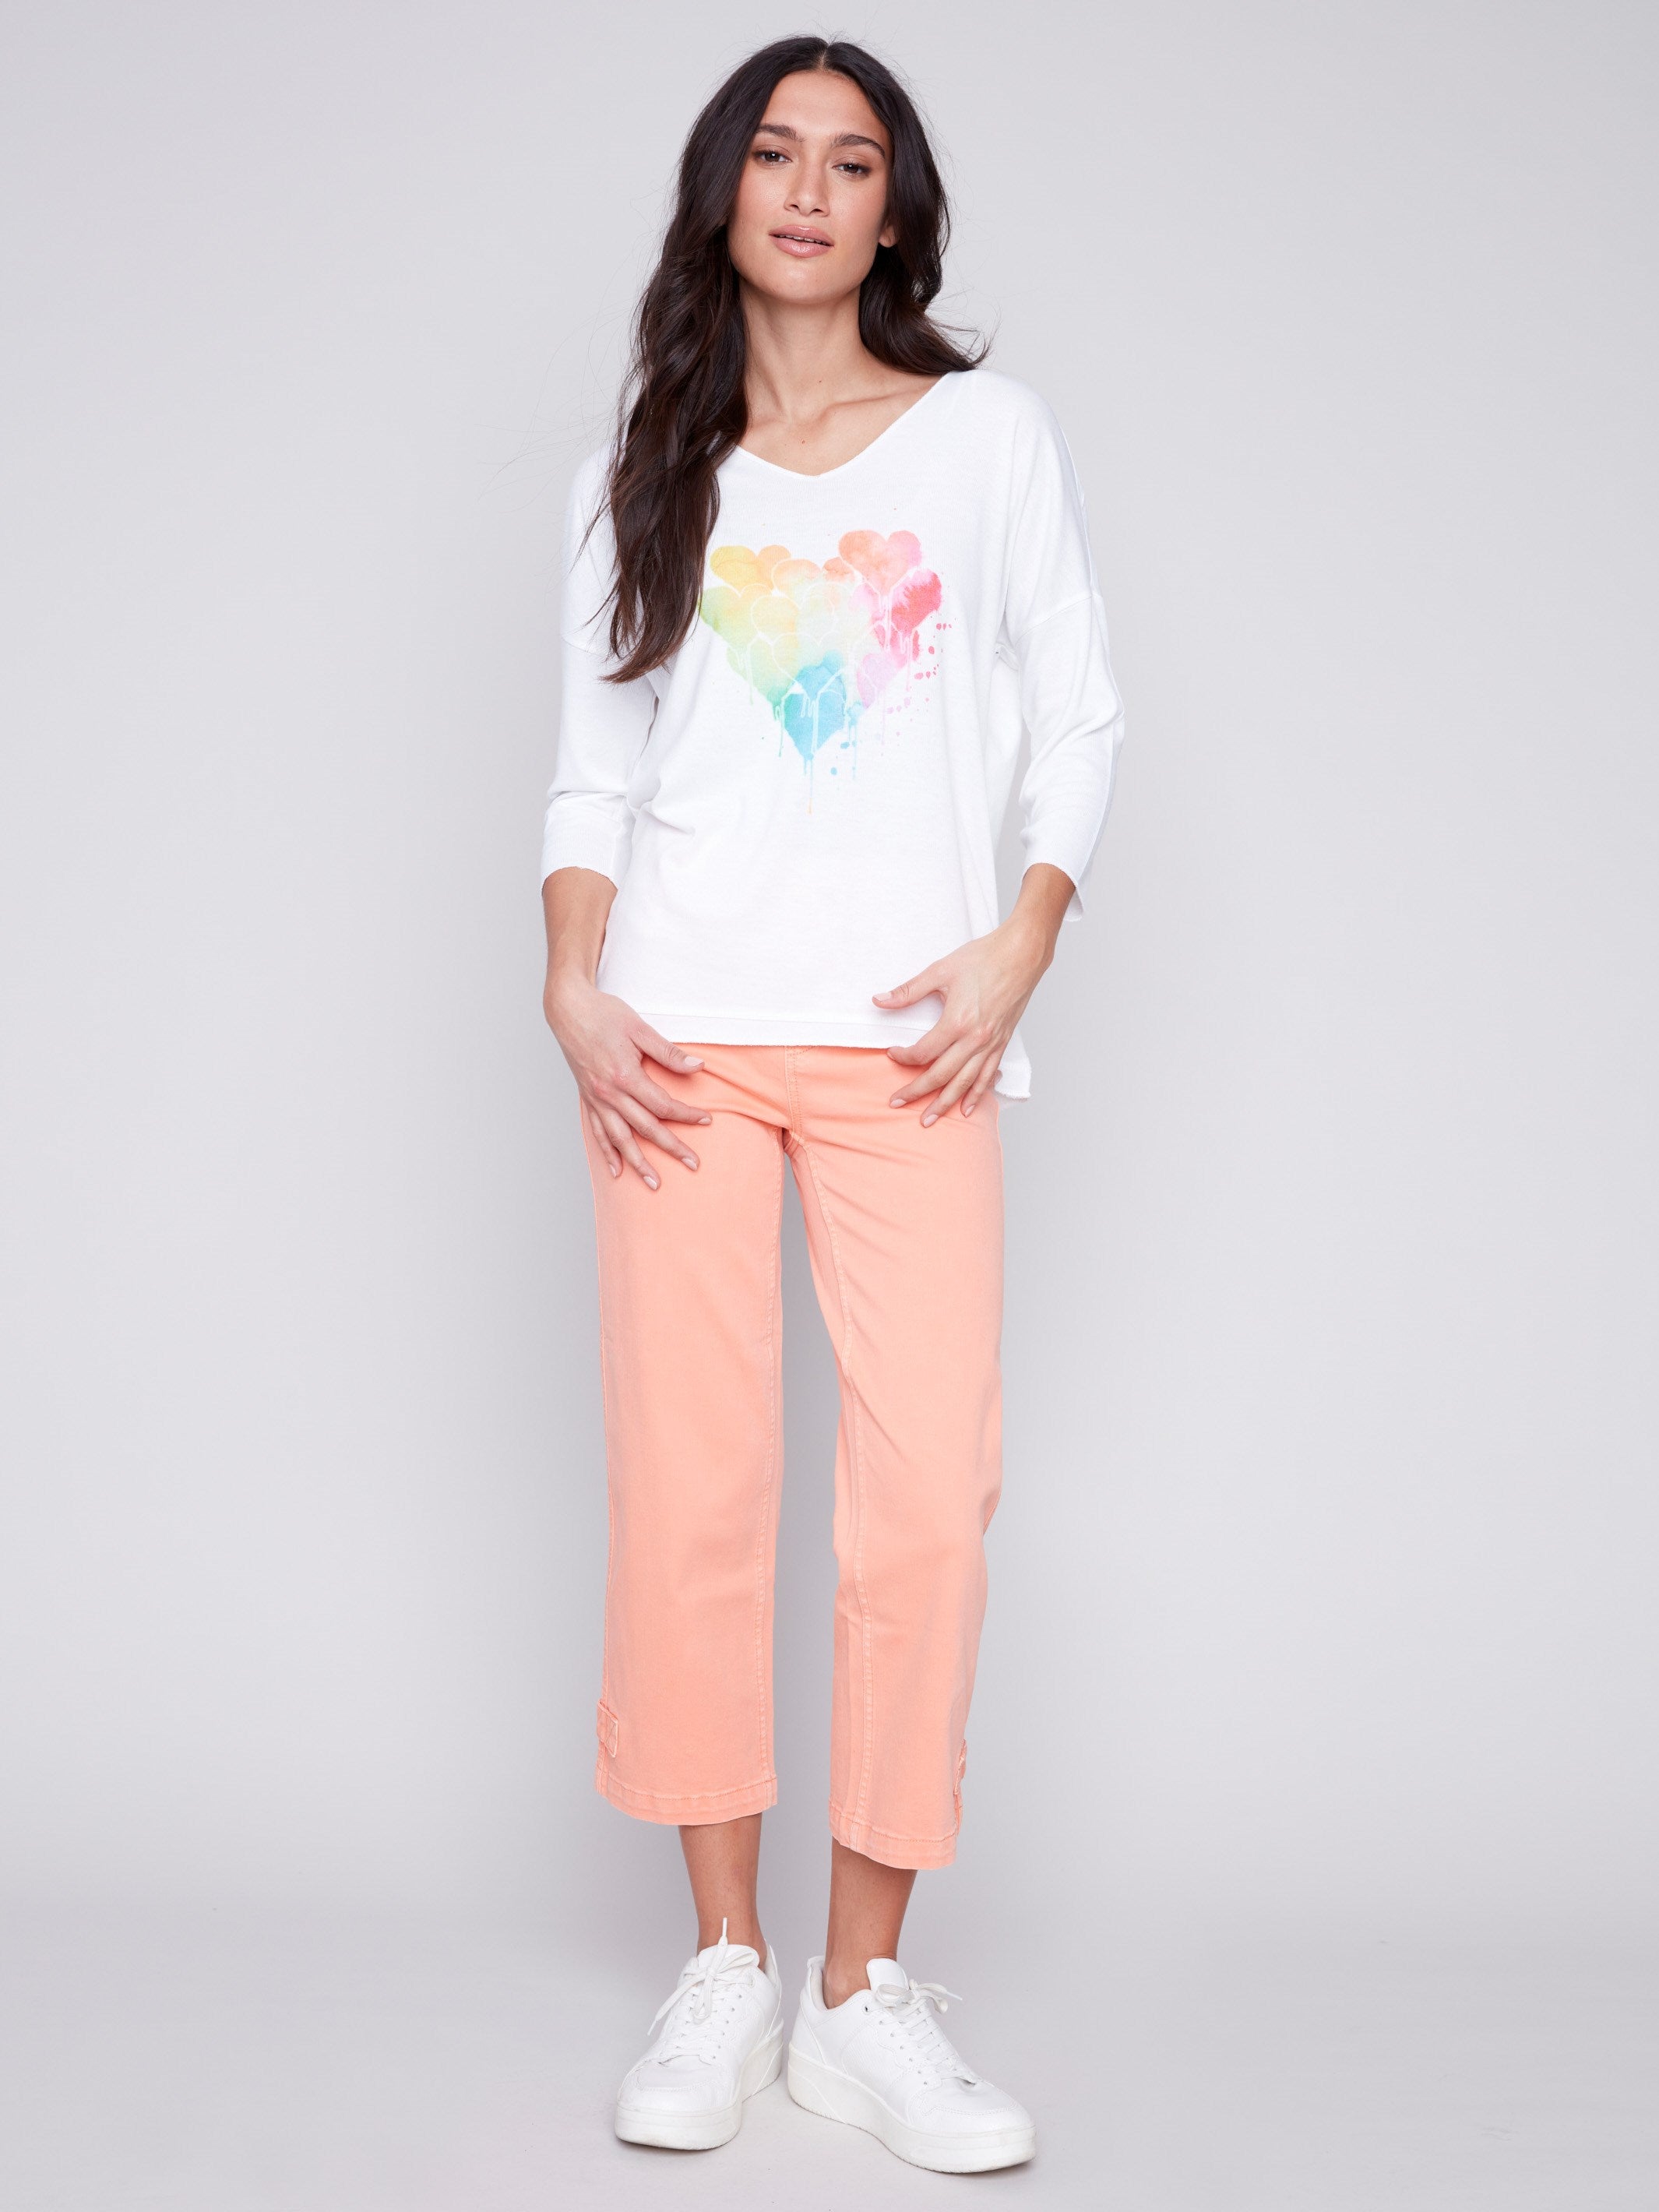 Tie Dye V-Neck Knit Top - White - Charlie B Collection Canada - Image 2